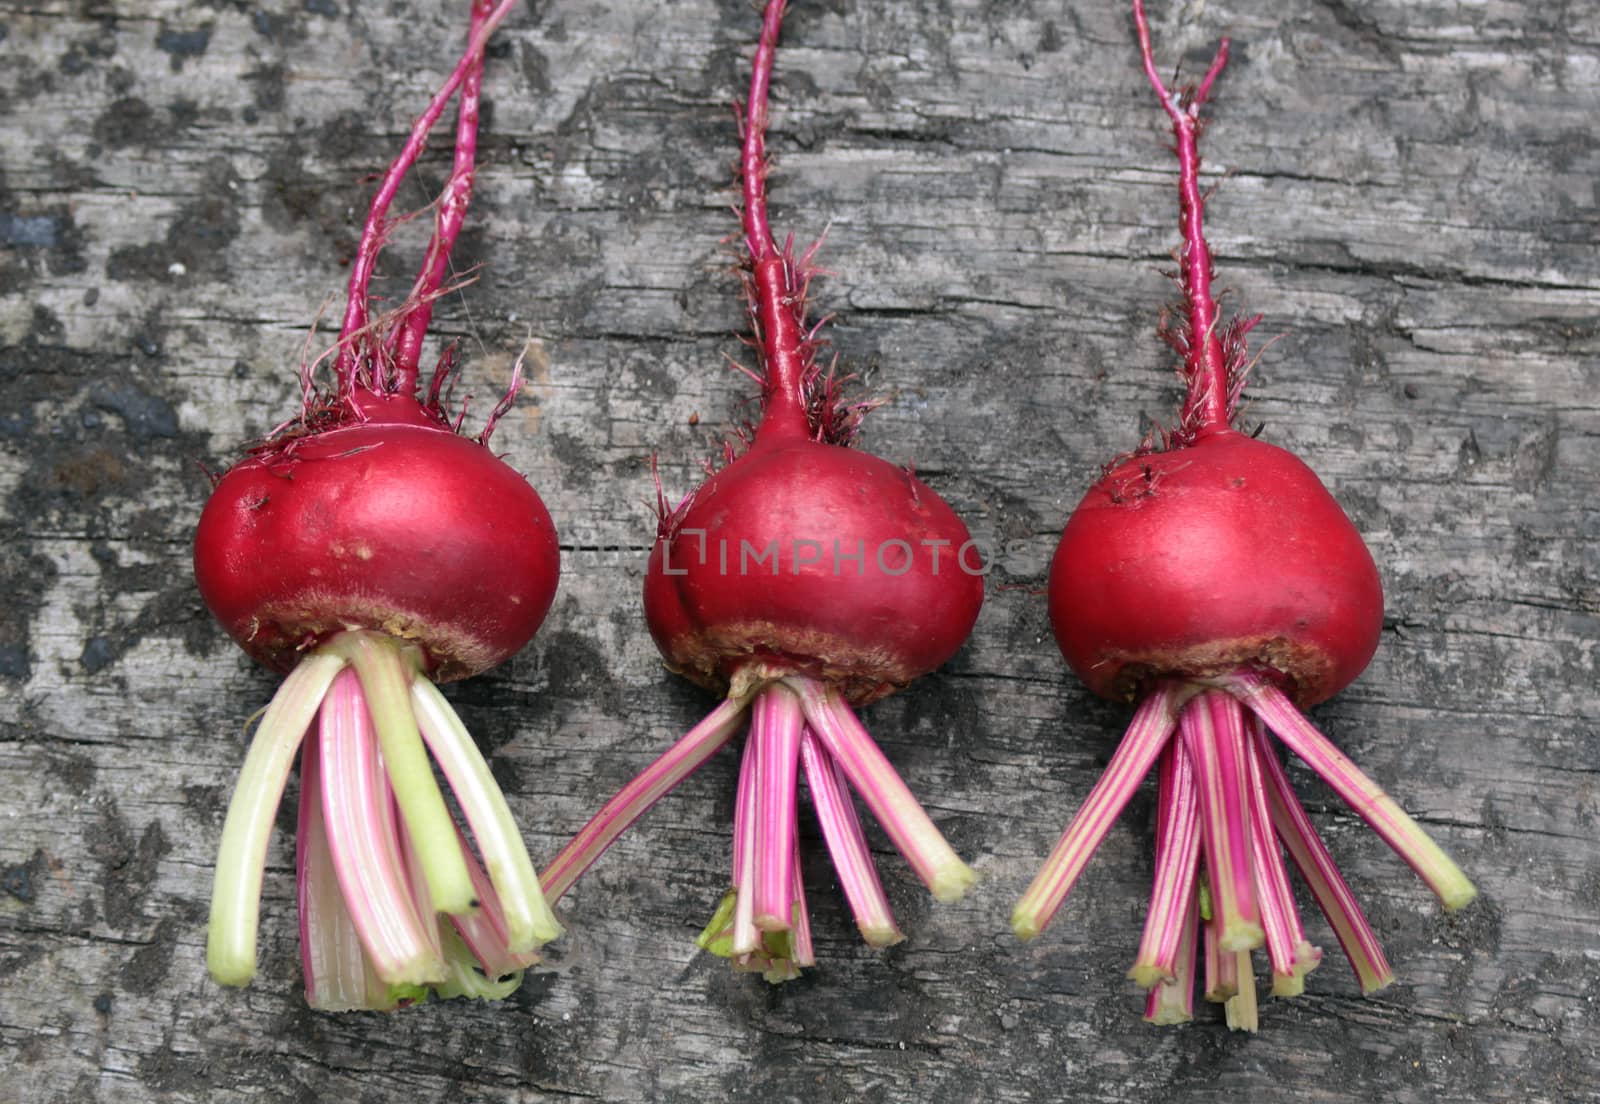 Three freshly picked beetroots, Chioggia, an Italian heirloom variety, with the remains of their tops attached. Set on a rustic wooden base on a landscape format, looking from above.